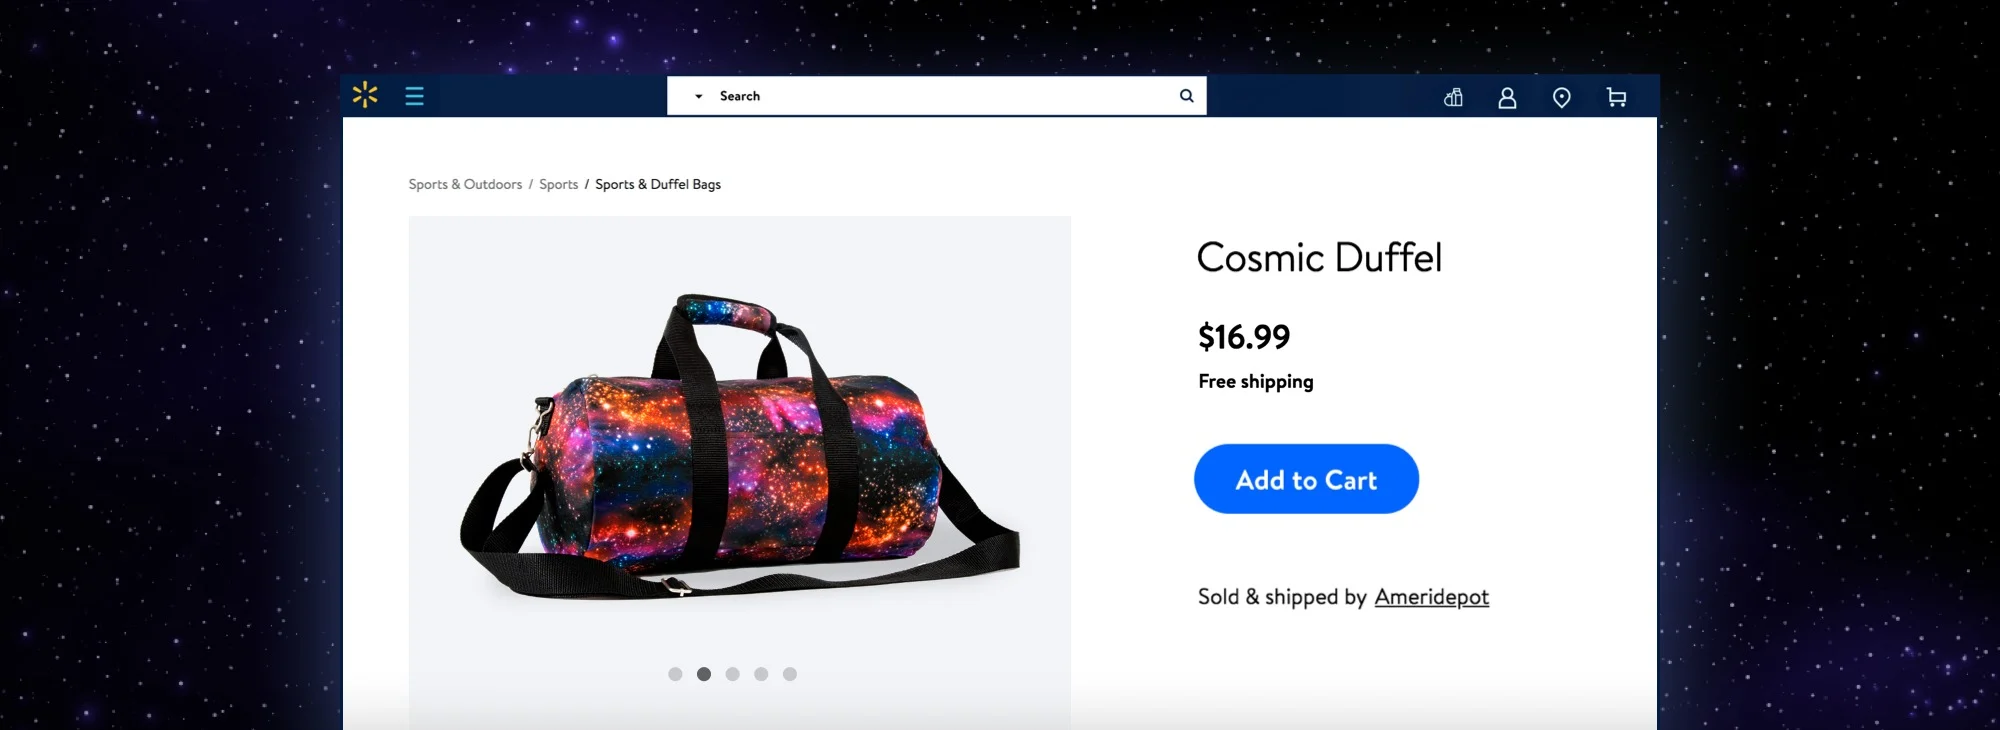 Walmart Wants to Sell You Fashion